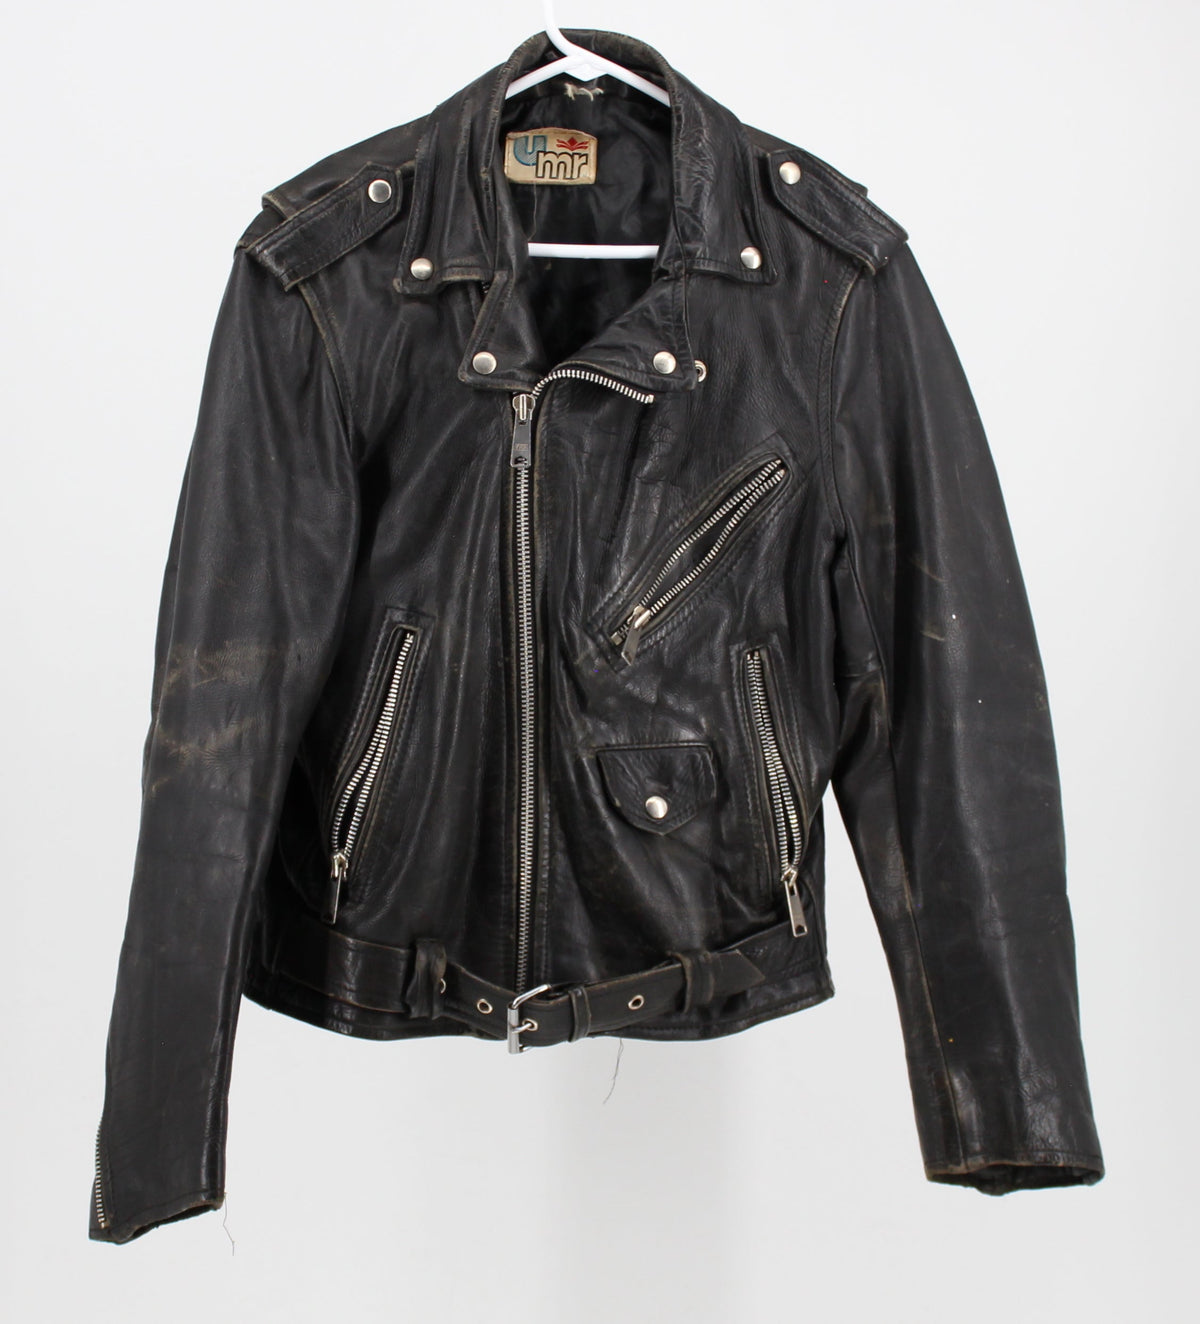 UMR black genuine leather jacket with zippers at front